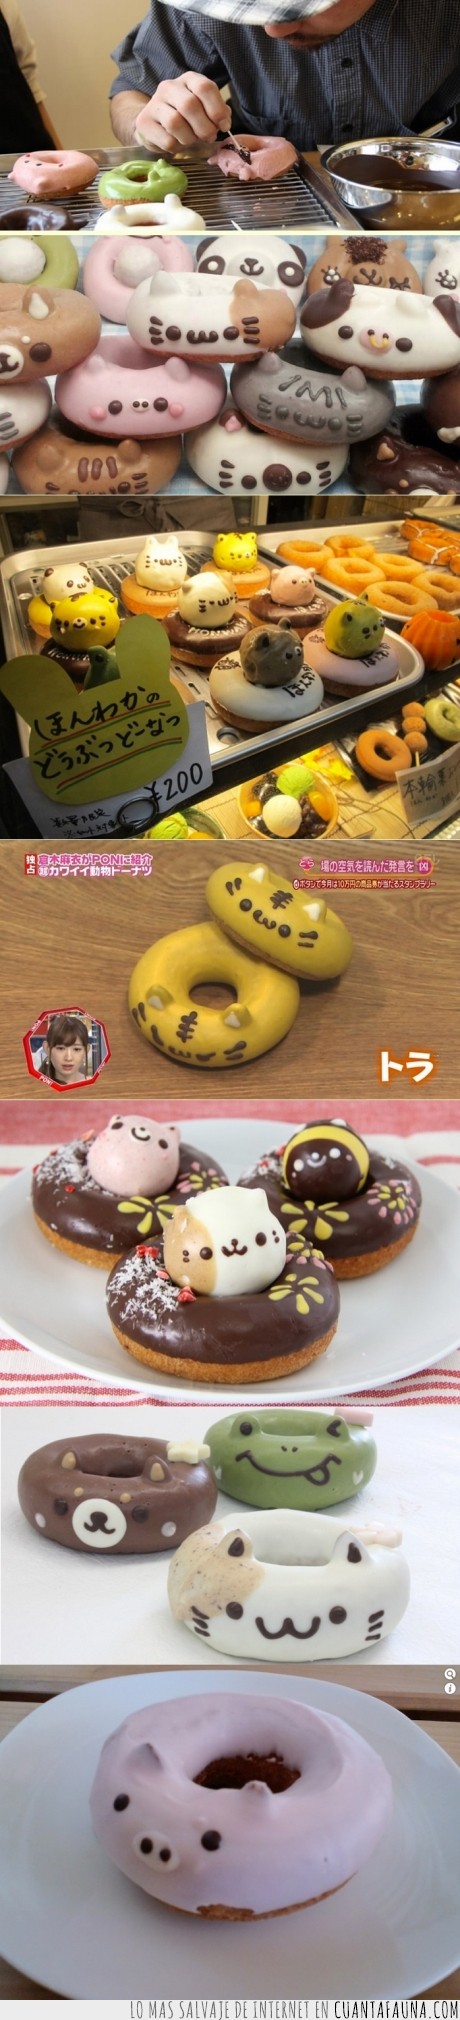 animales,donuts,kawaii,japon,gato,frost